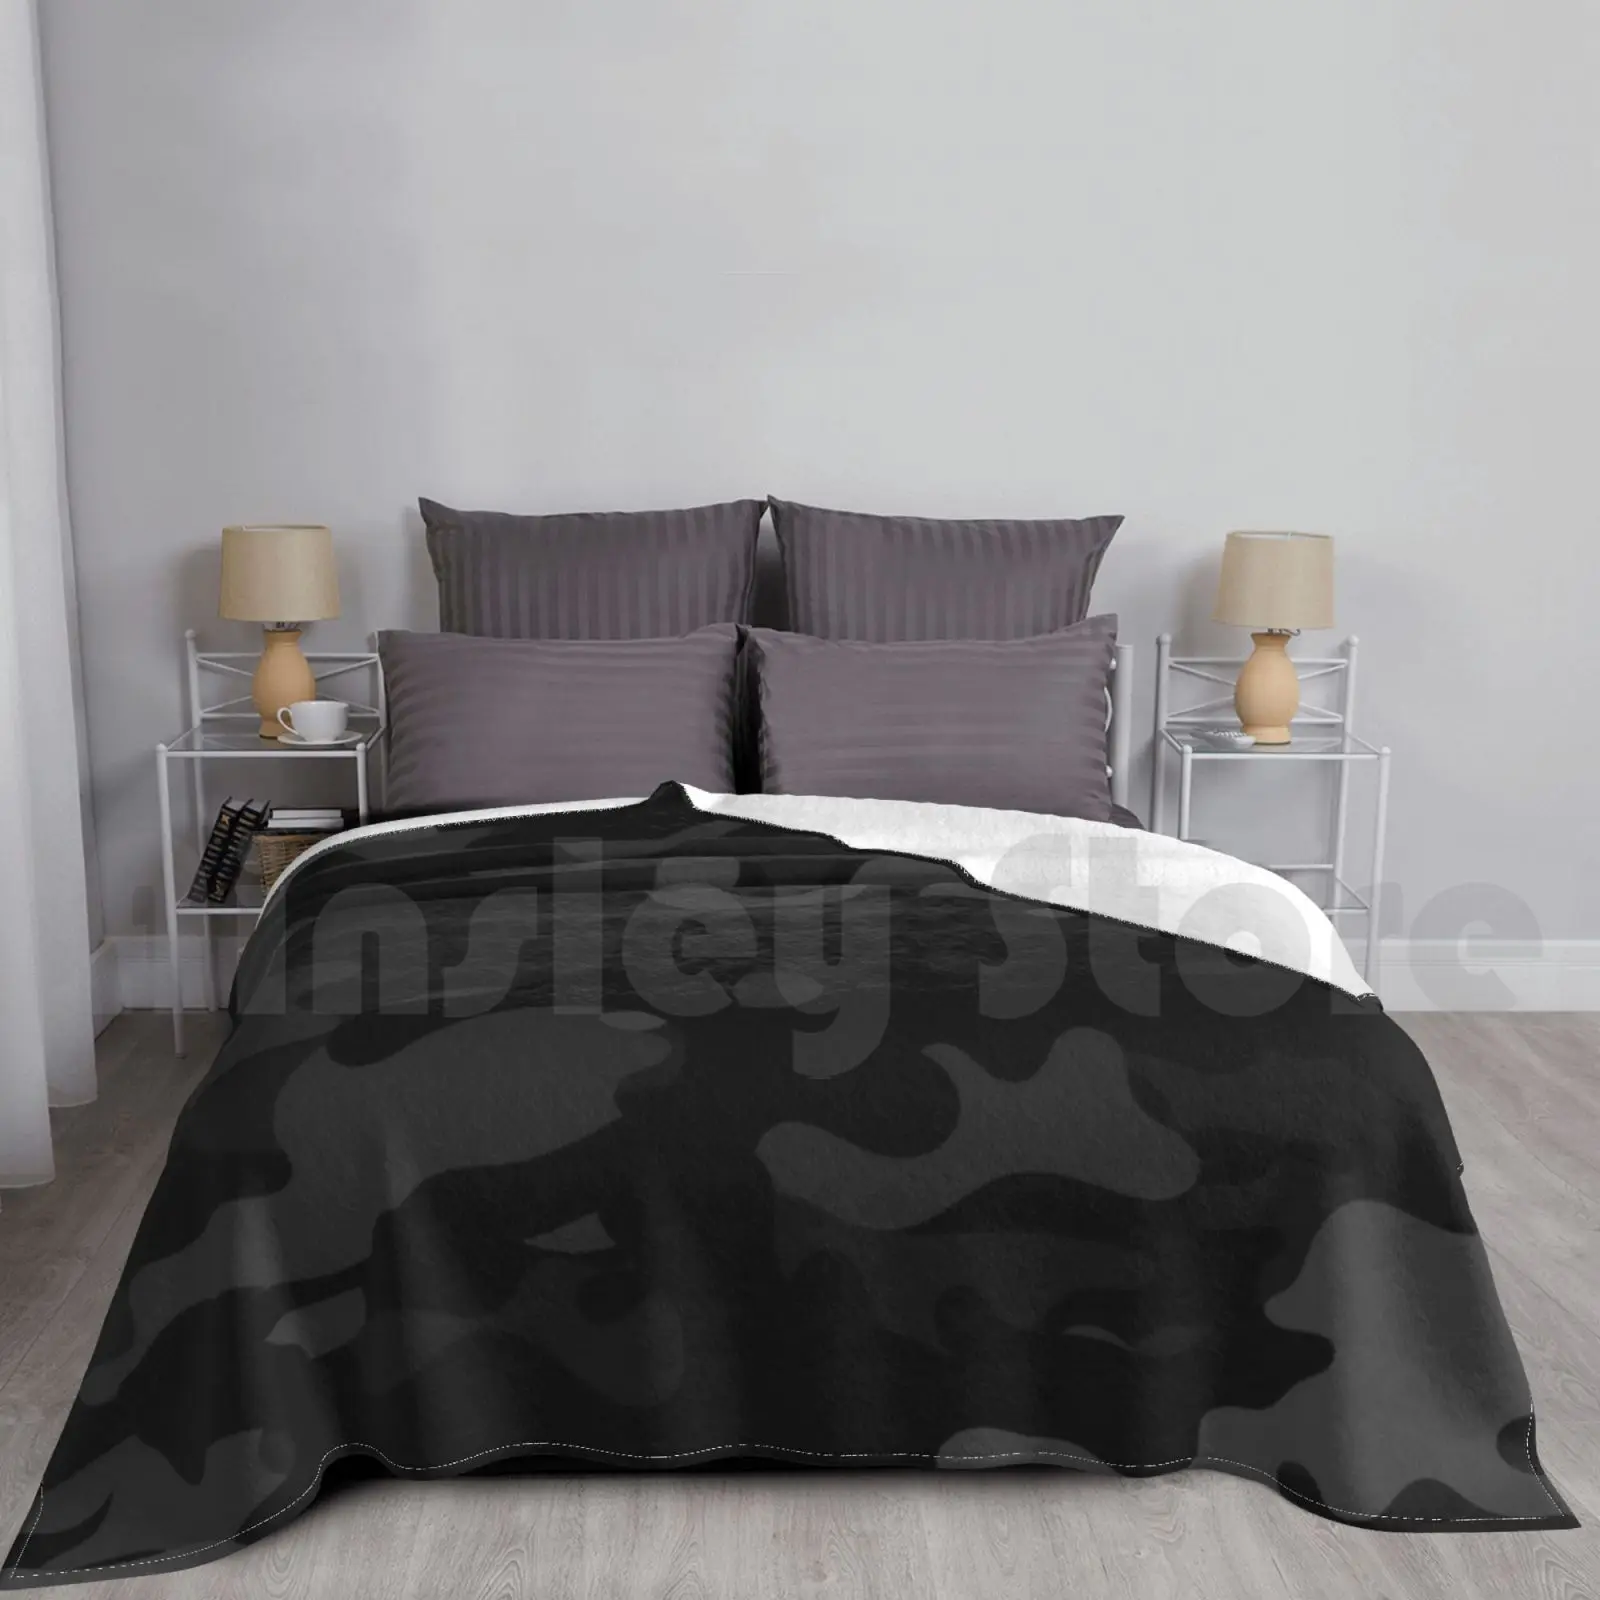 

Blanket Camouflage Pattern Cool Army Midnight Camo Print Grey & Black Color For Lovers Of The Armed Forces